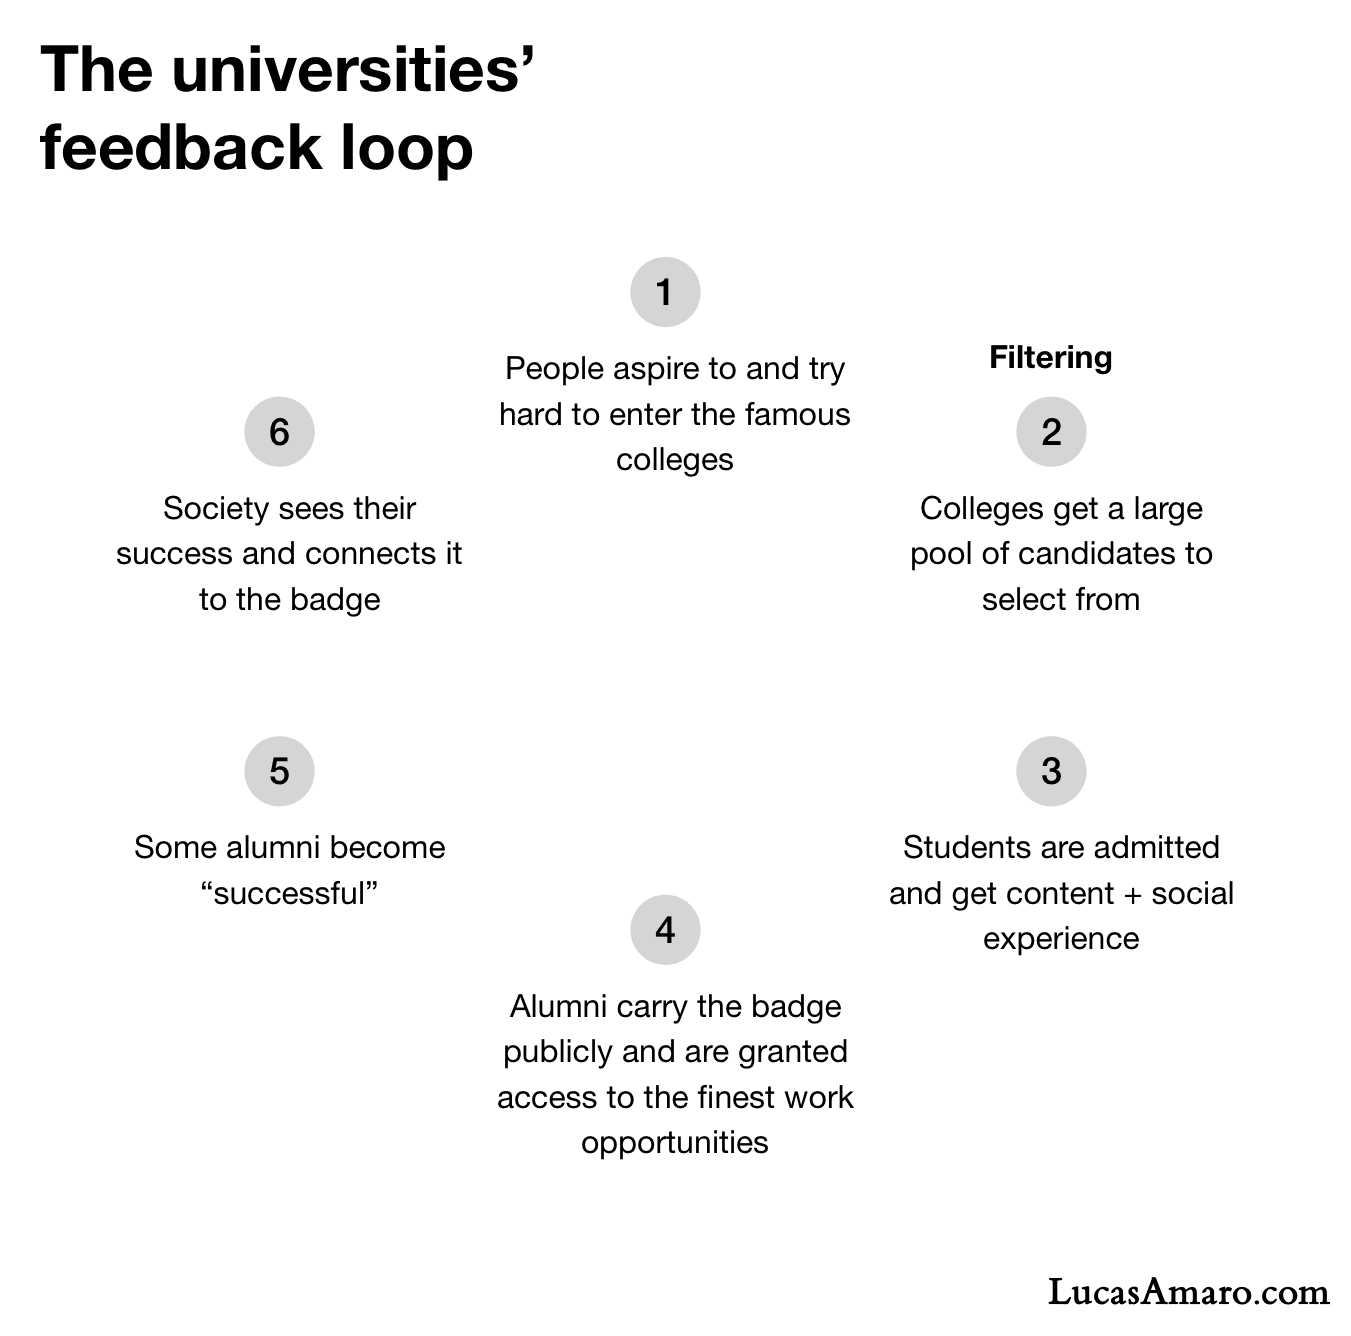 The core feedback loop that makes colleges so powerful in society